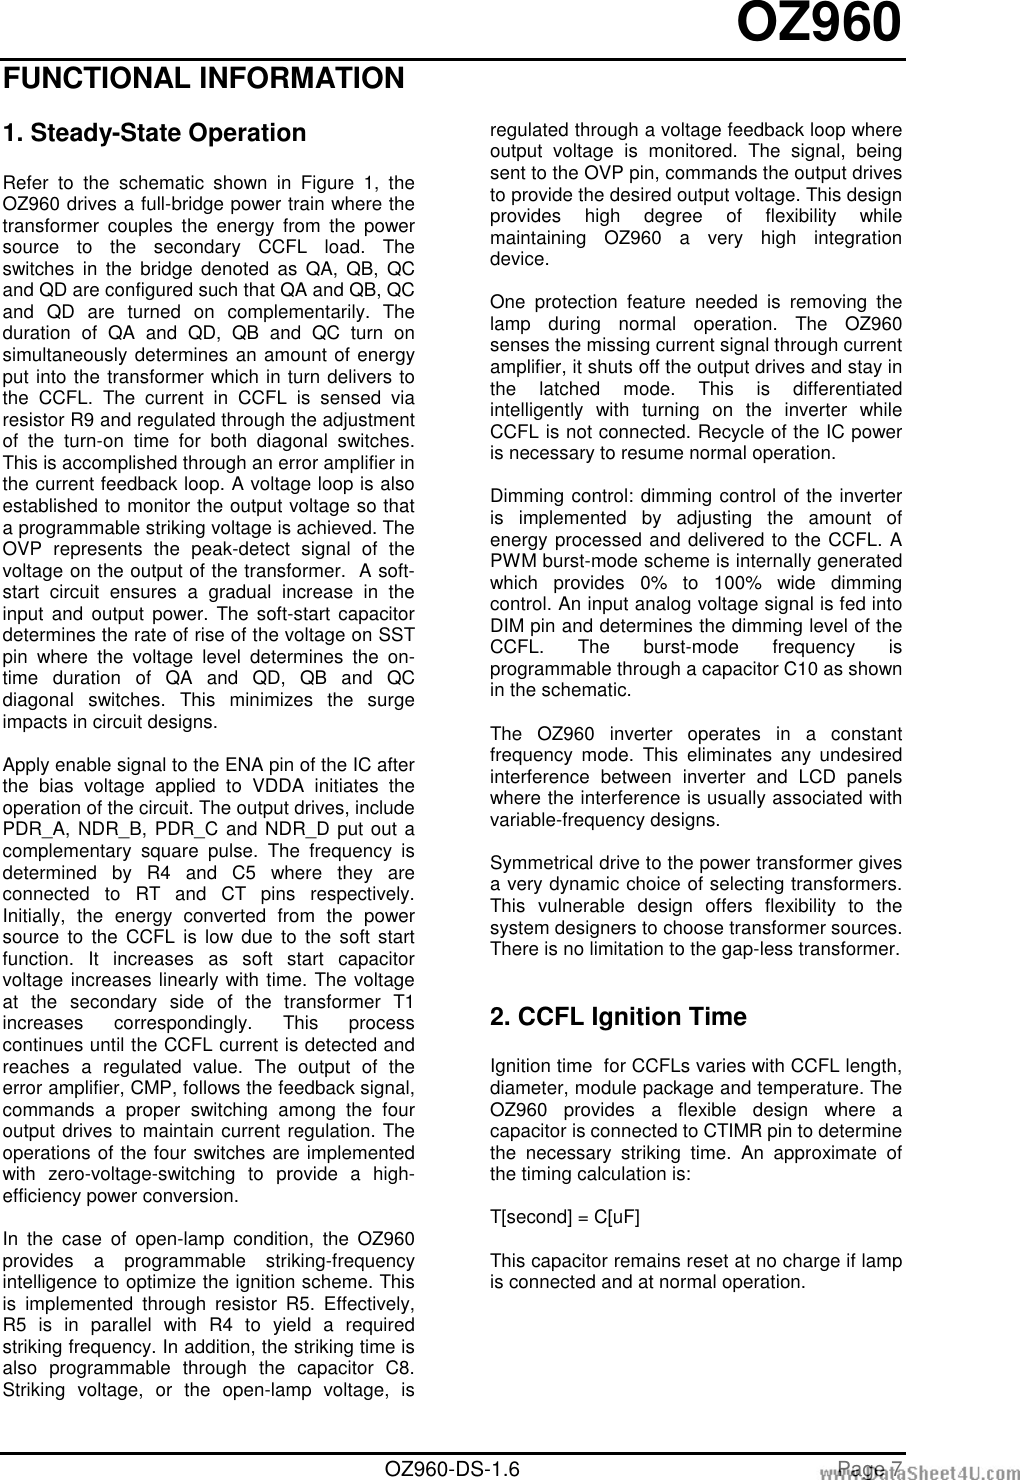 Page 7 of 12 - CCFL Backlight Controller 2008129131956425